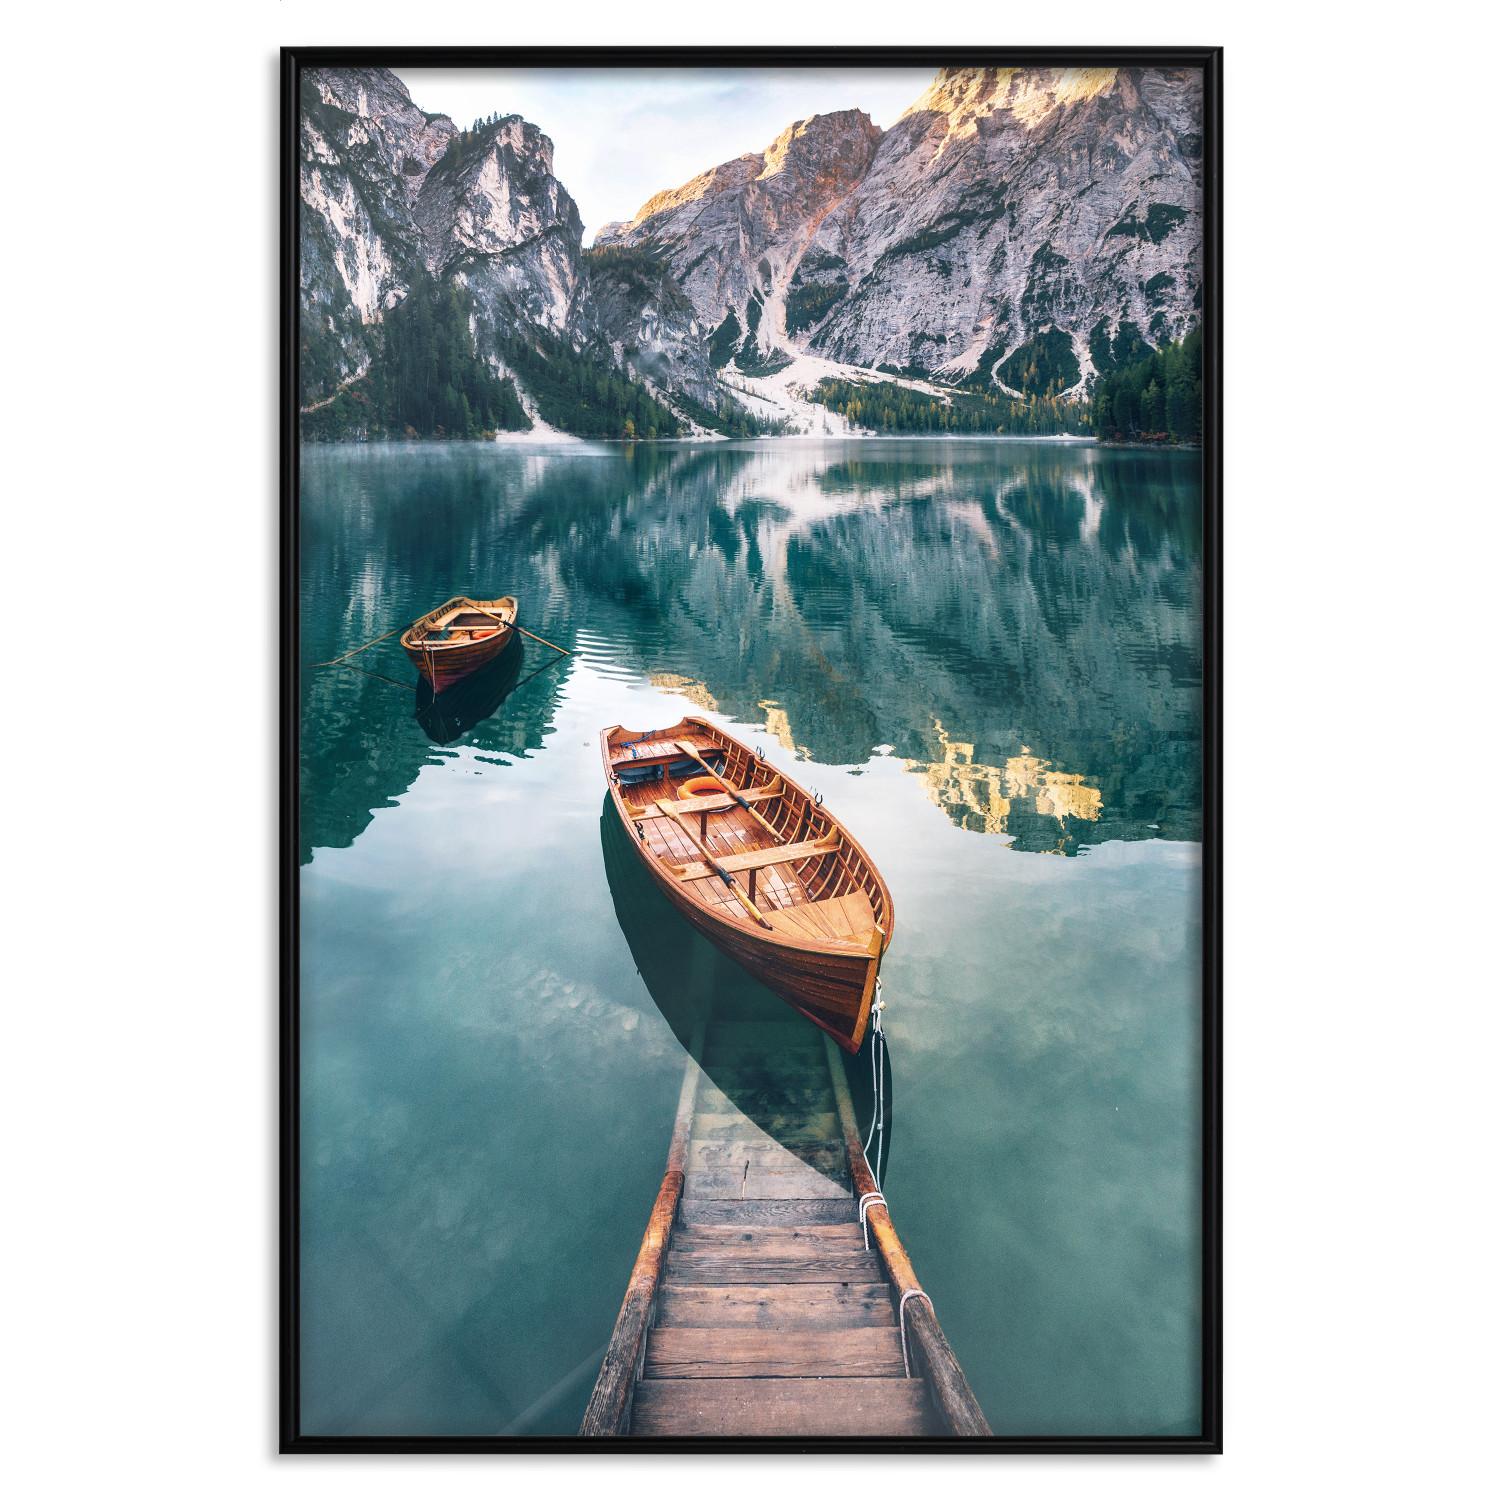 Gallery wall Boats in the Dolomites - picturesque water landscape against a mountain range backdrop